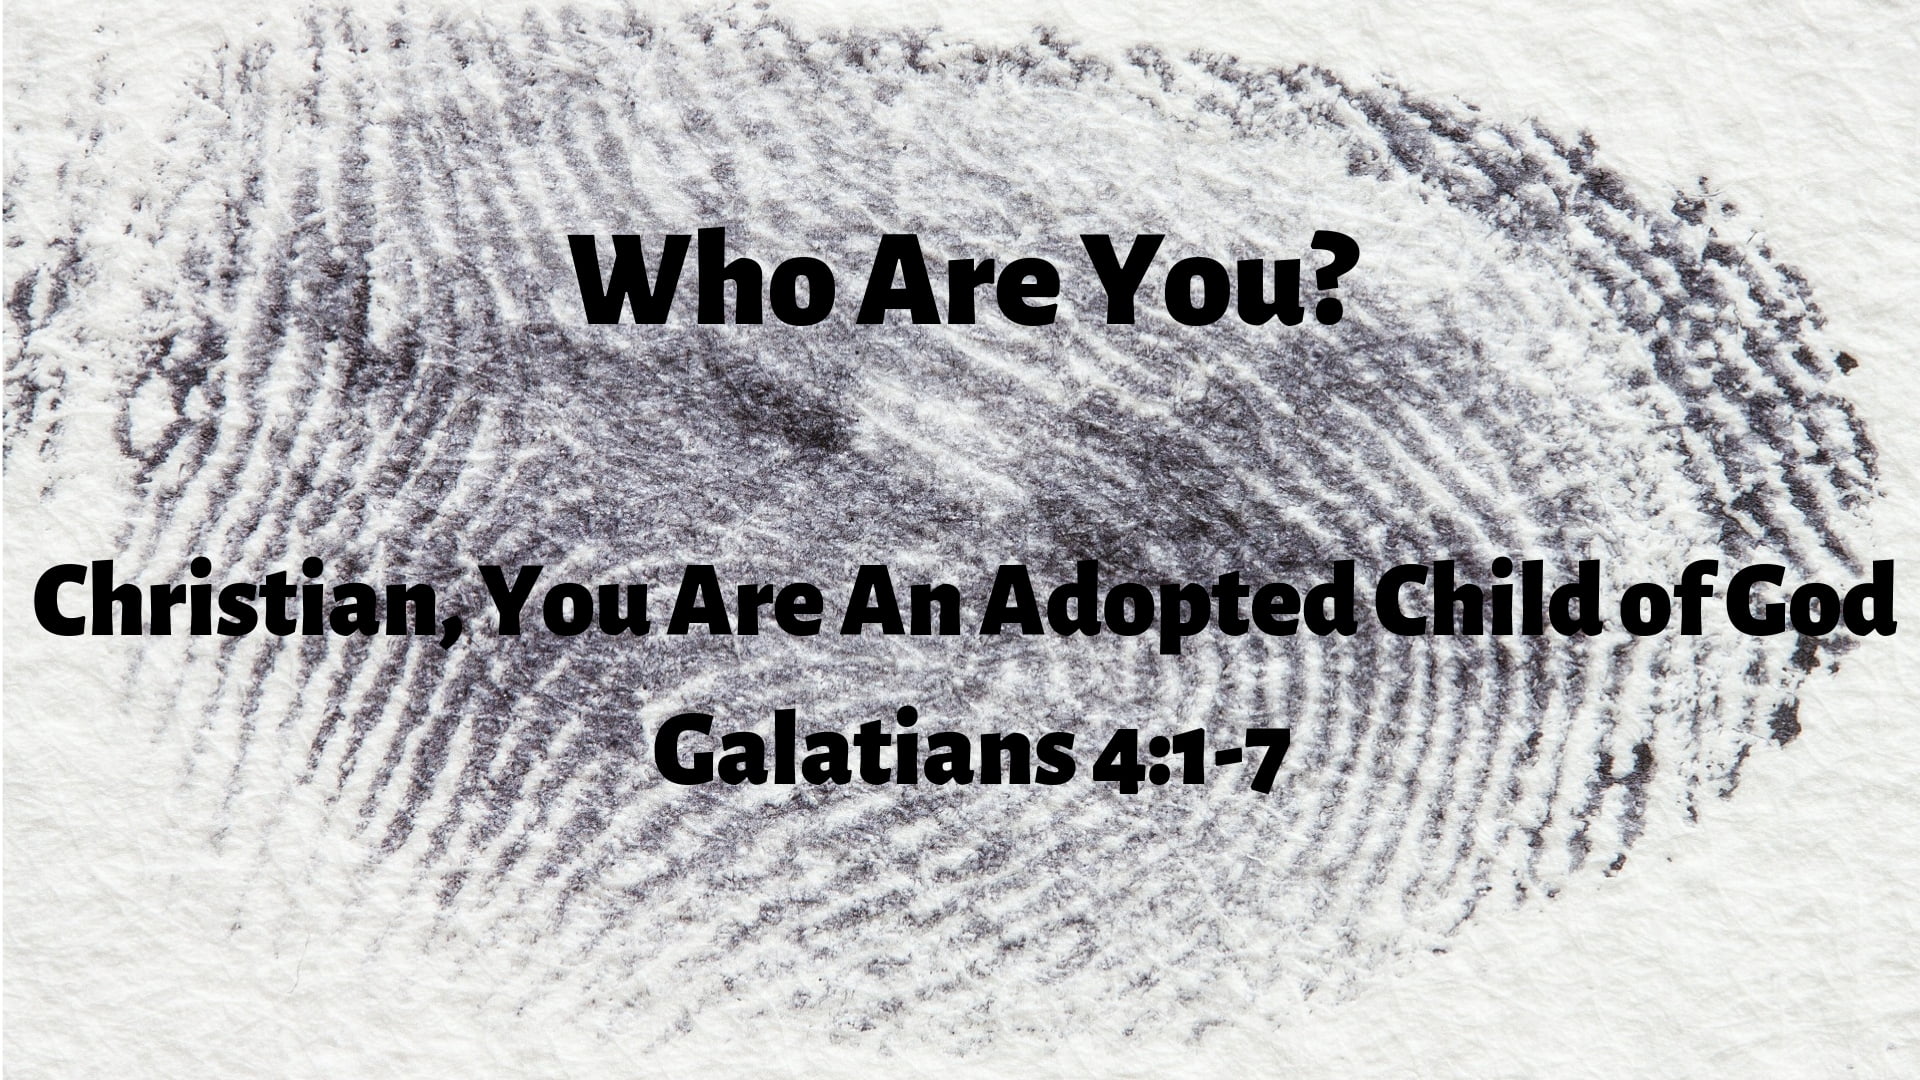 You Are Adopted Into God's Family (Galatians 417